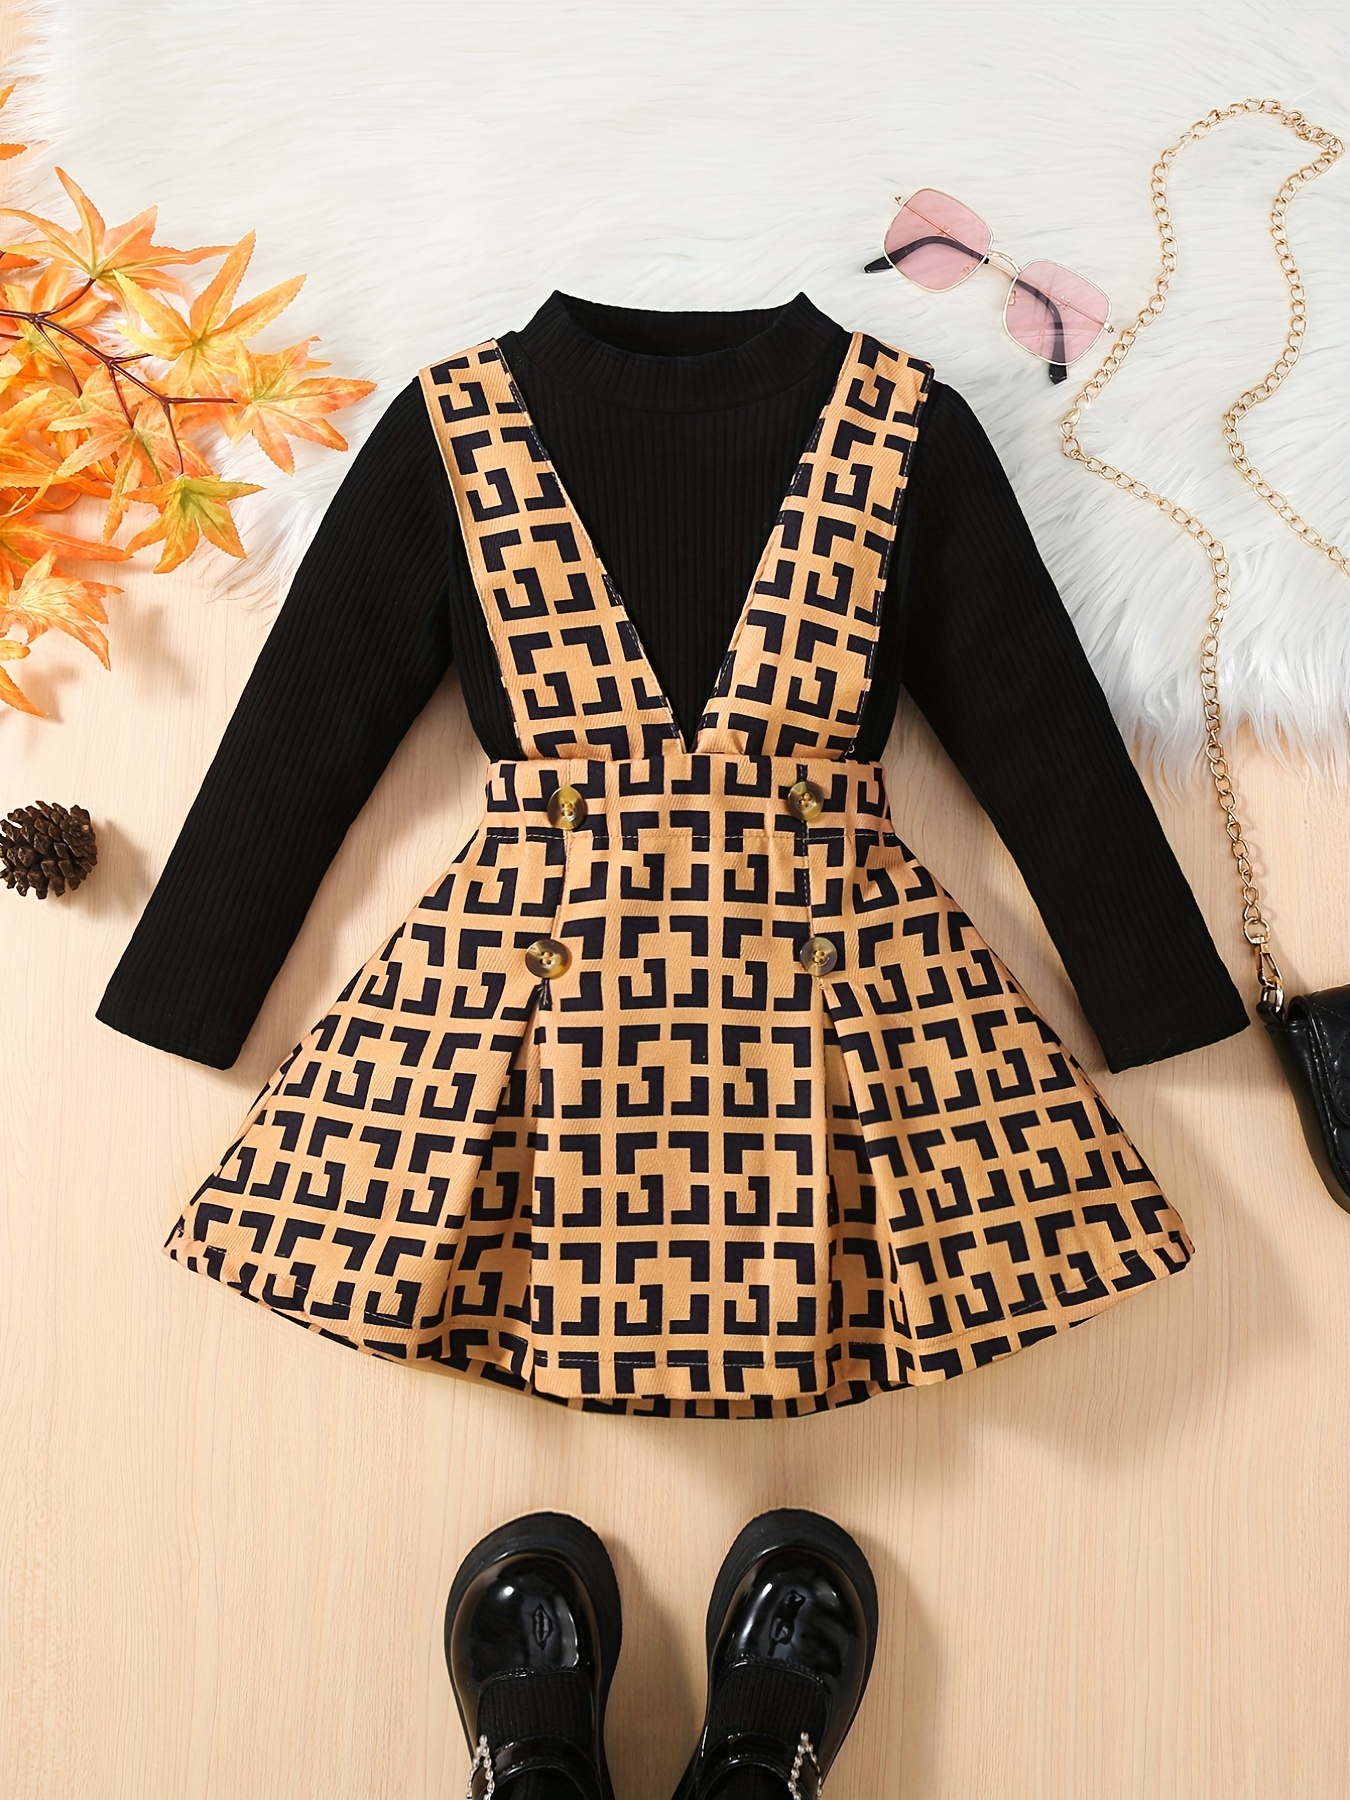 Fashion Coats Dresses Girls Two Piece Dress Children Winter Outfits Kids  Plaid Skirt Sports Suits Boutique Clothes From Coolwheel, $17.59